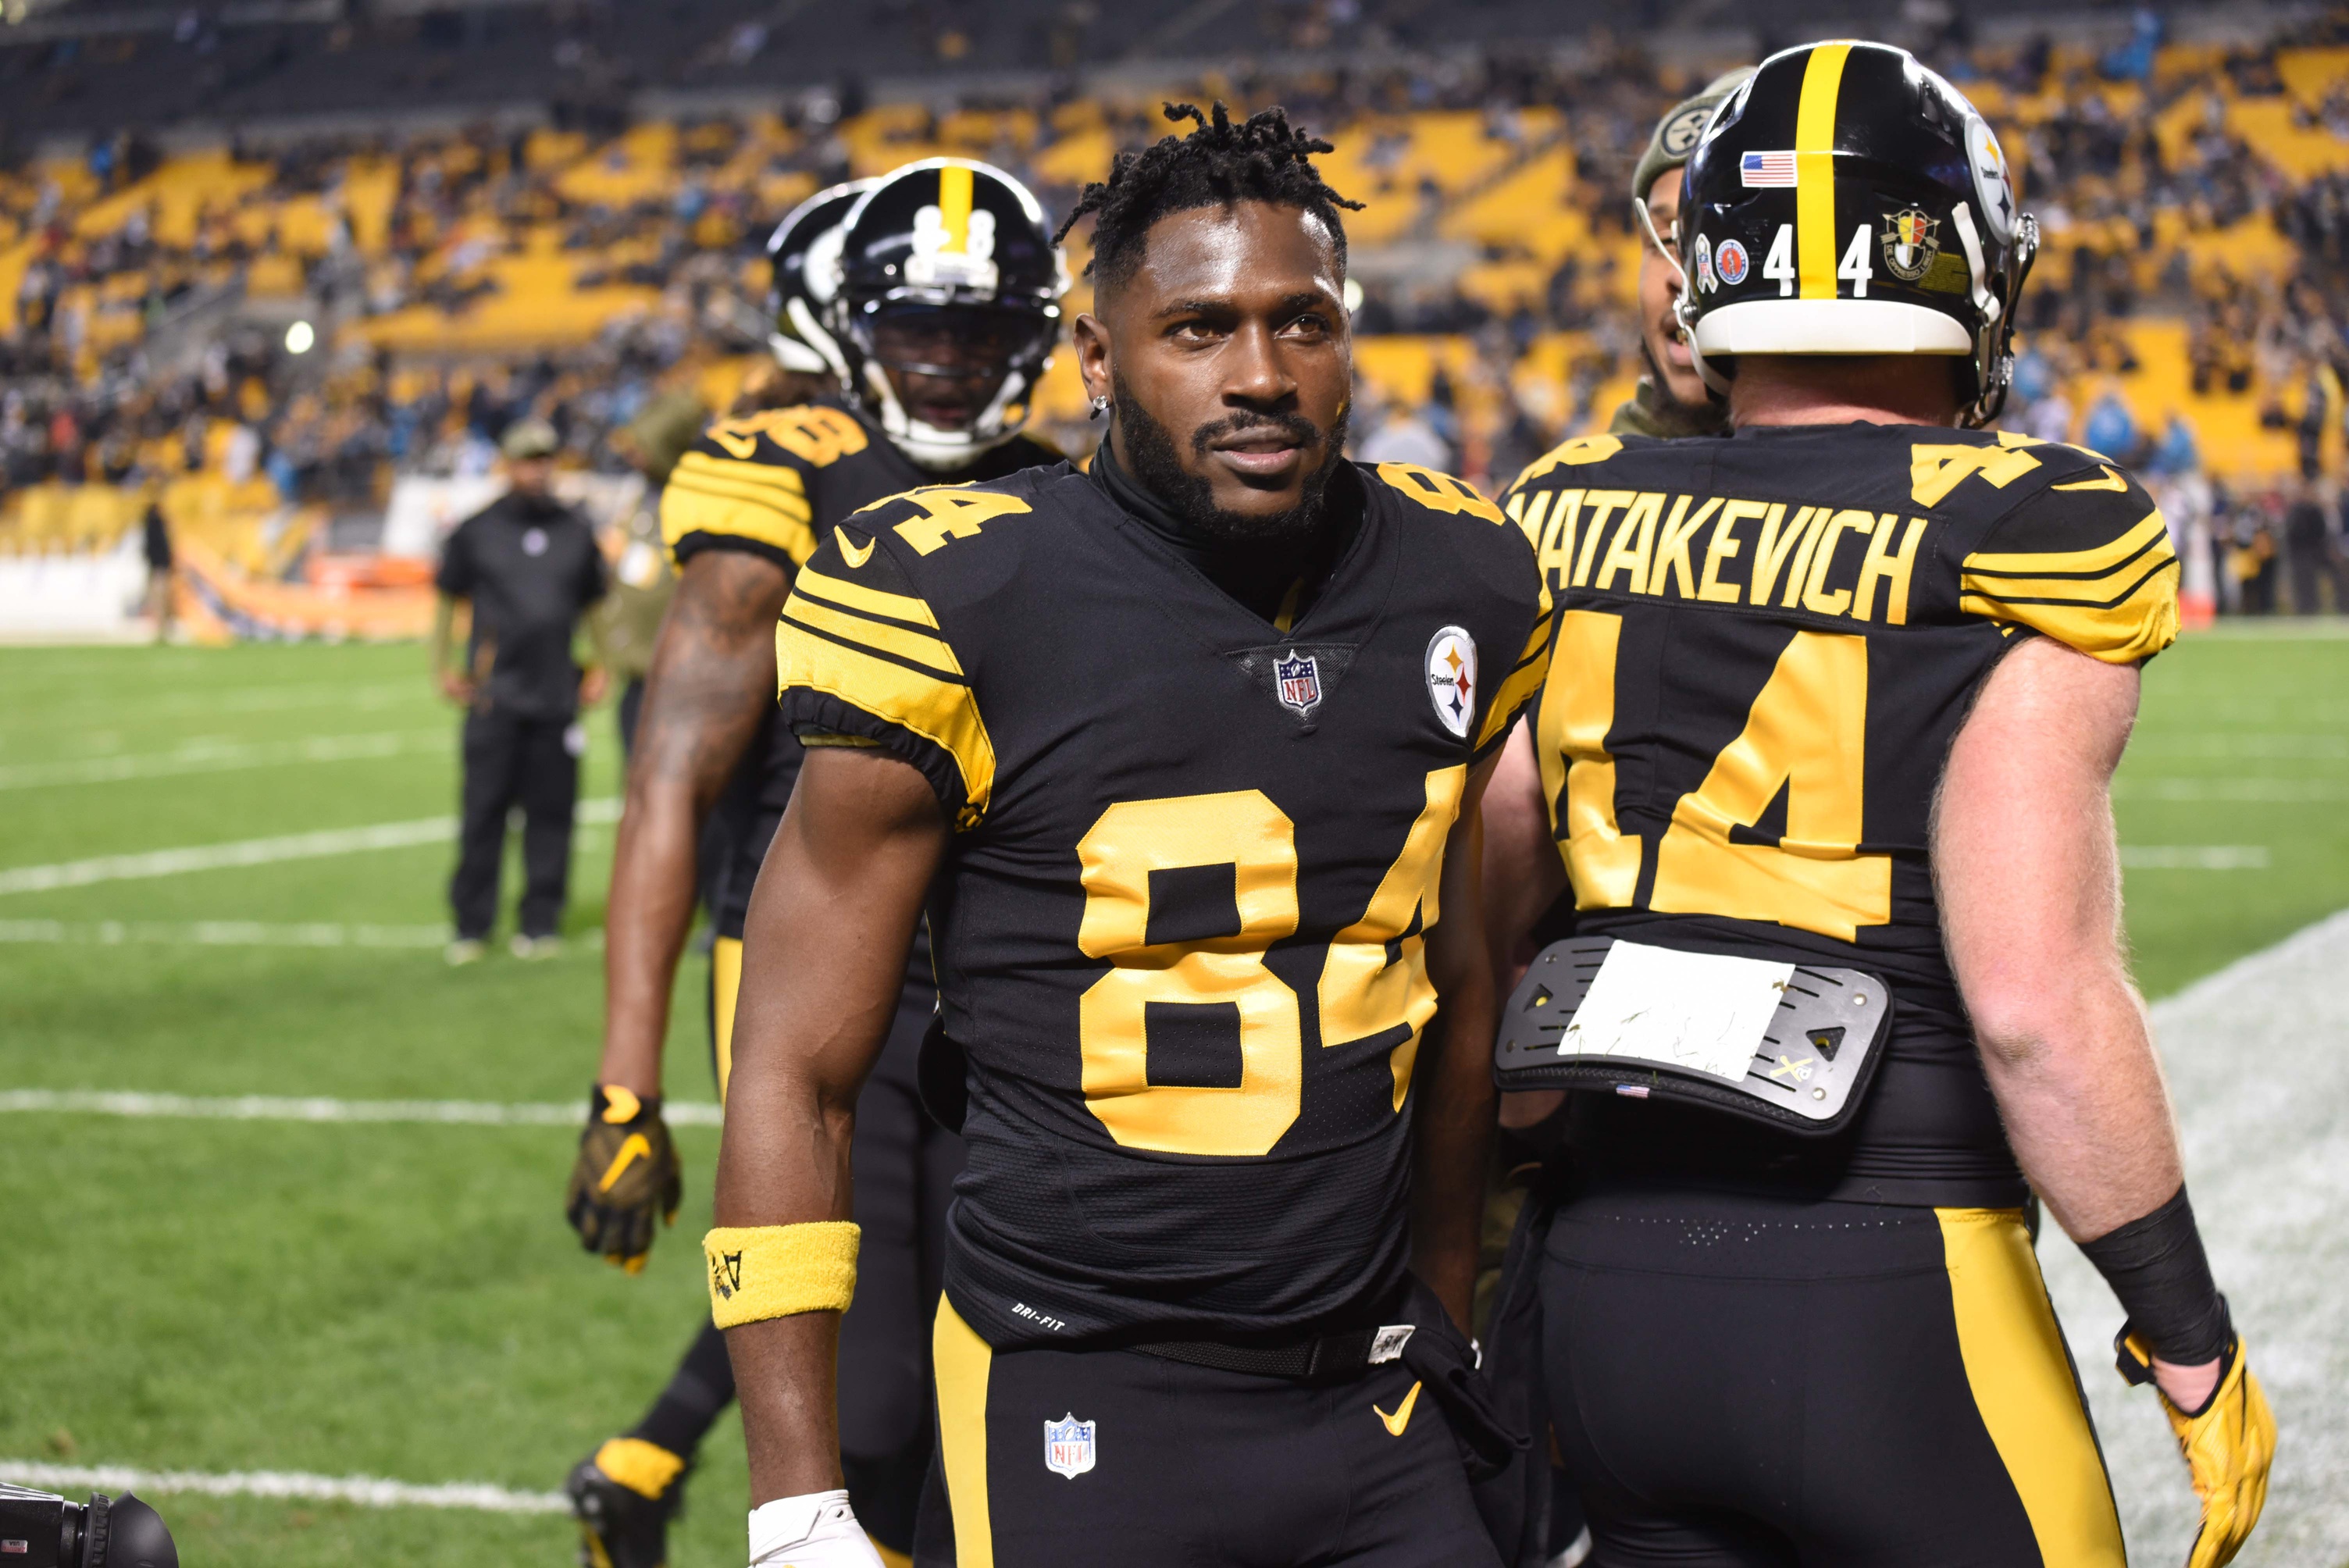 Antonio Brown says goodbye to Steelers fans, says it's time to move on3008 x 2008